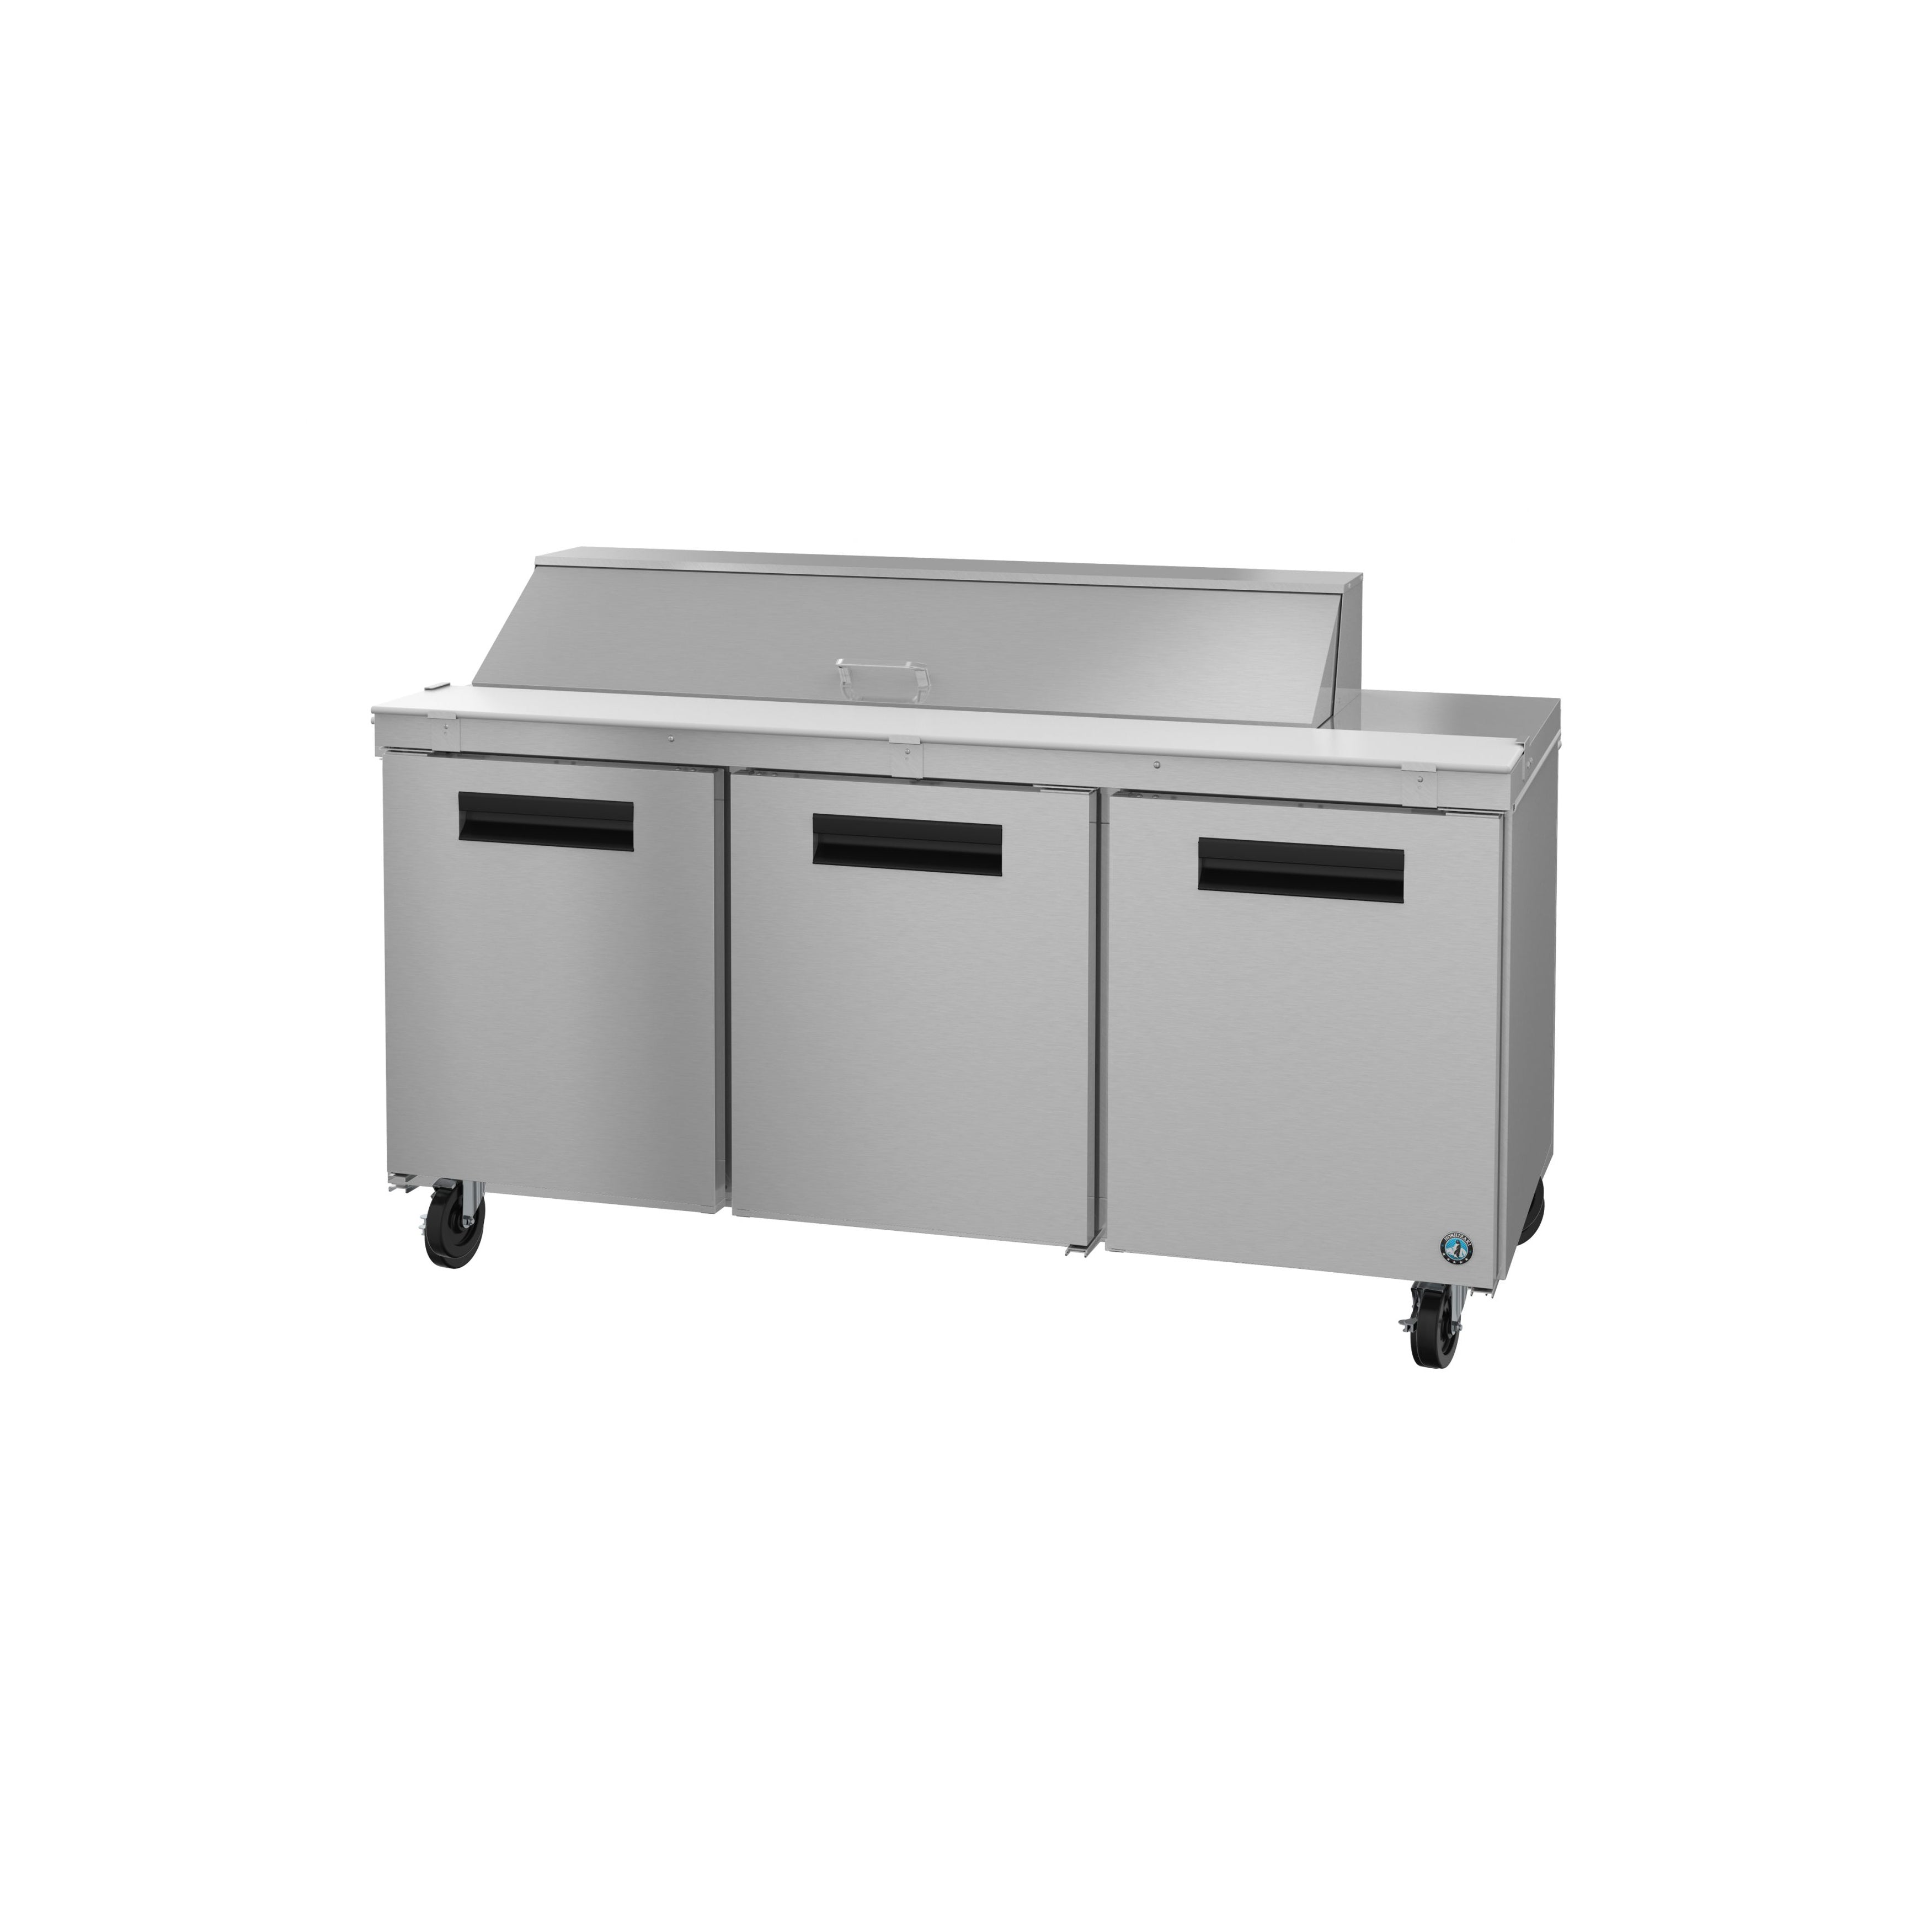 Hoshizaki - SR72B-16, Commercial 72" Three Section Sandwich Prep Table Refrigerator Stainless Doors 18cu.ft.